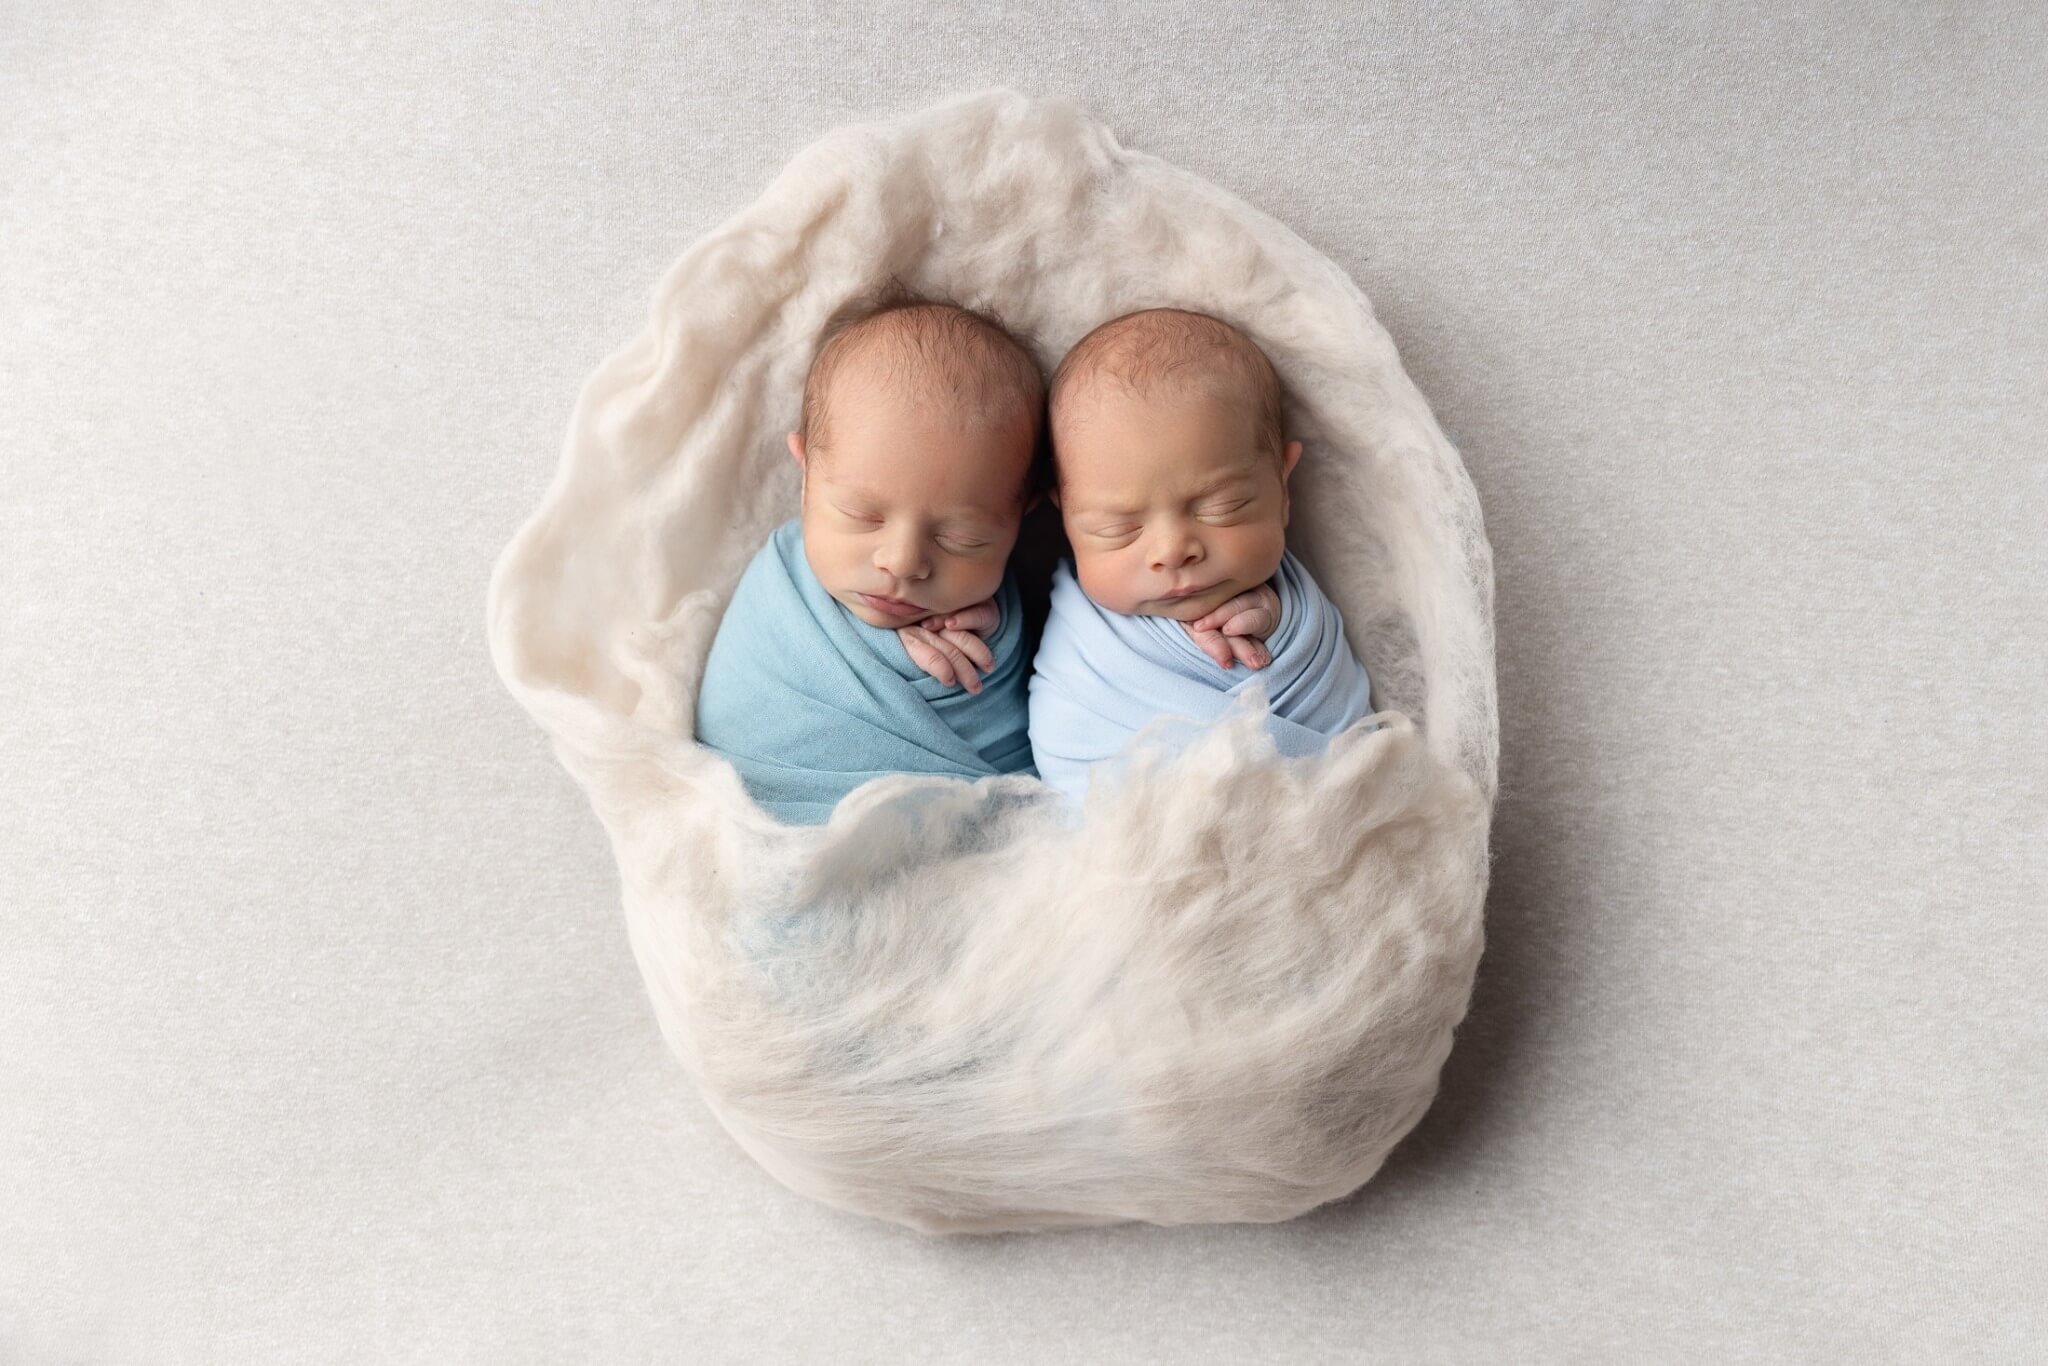 Photo Taken of 2 Babies Wrapped in Swaddling